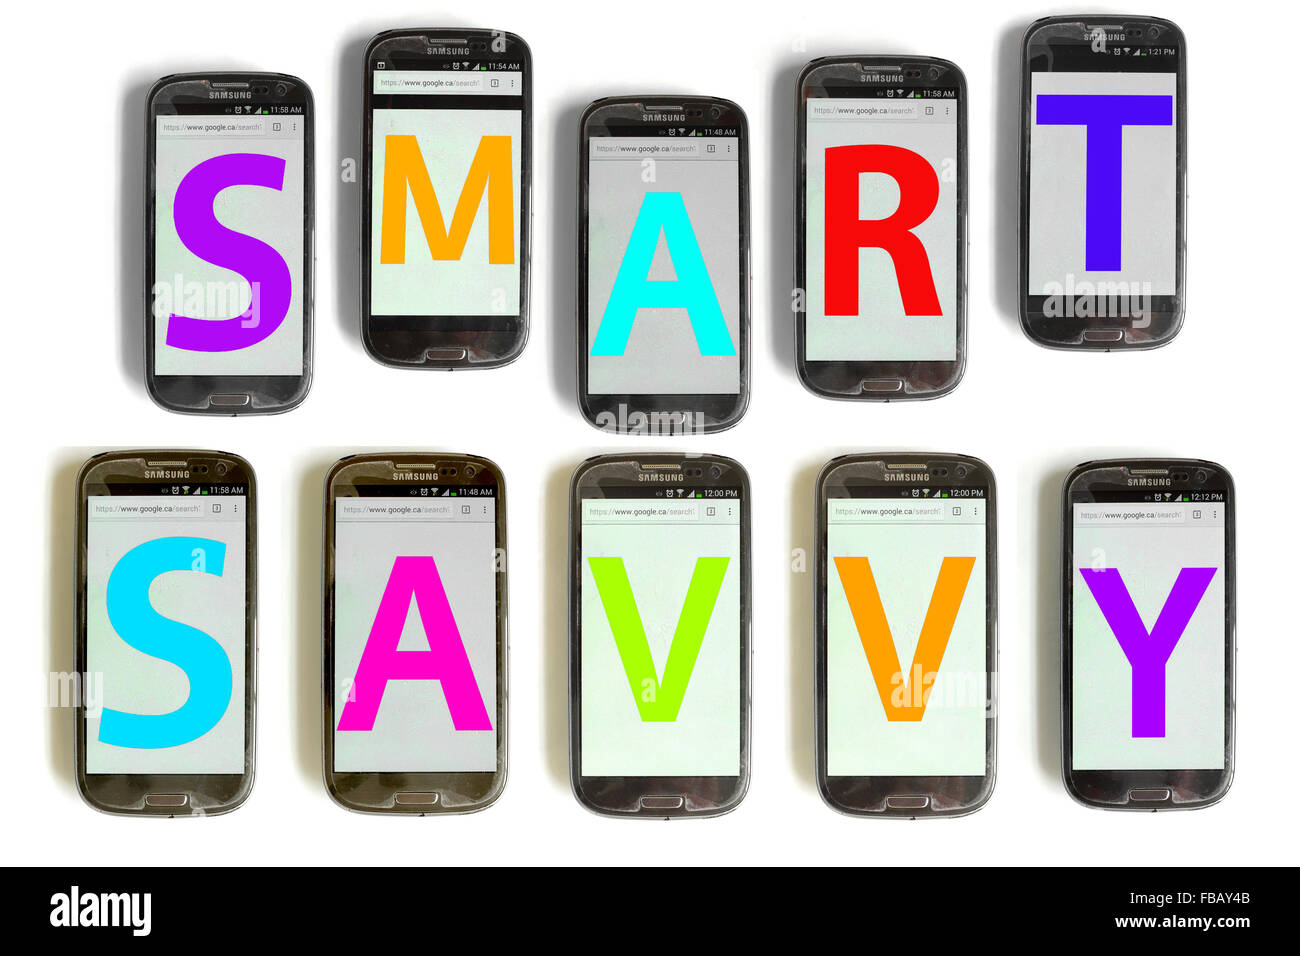 Smart Savvy spelled out on mobile phone screens photographed against a white background. Stock Photo